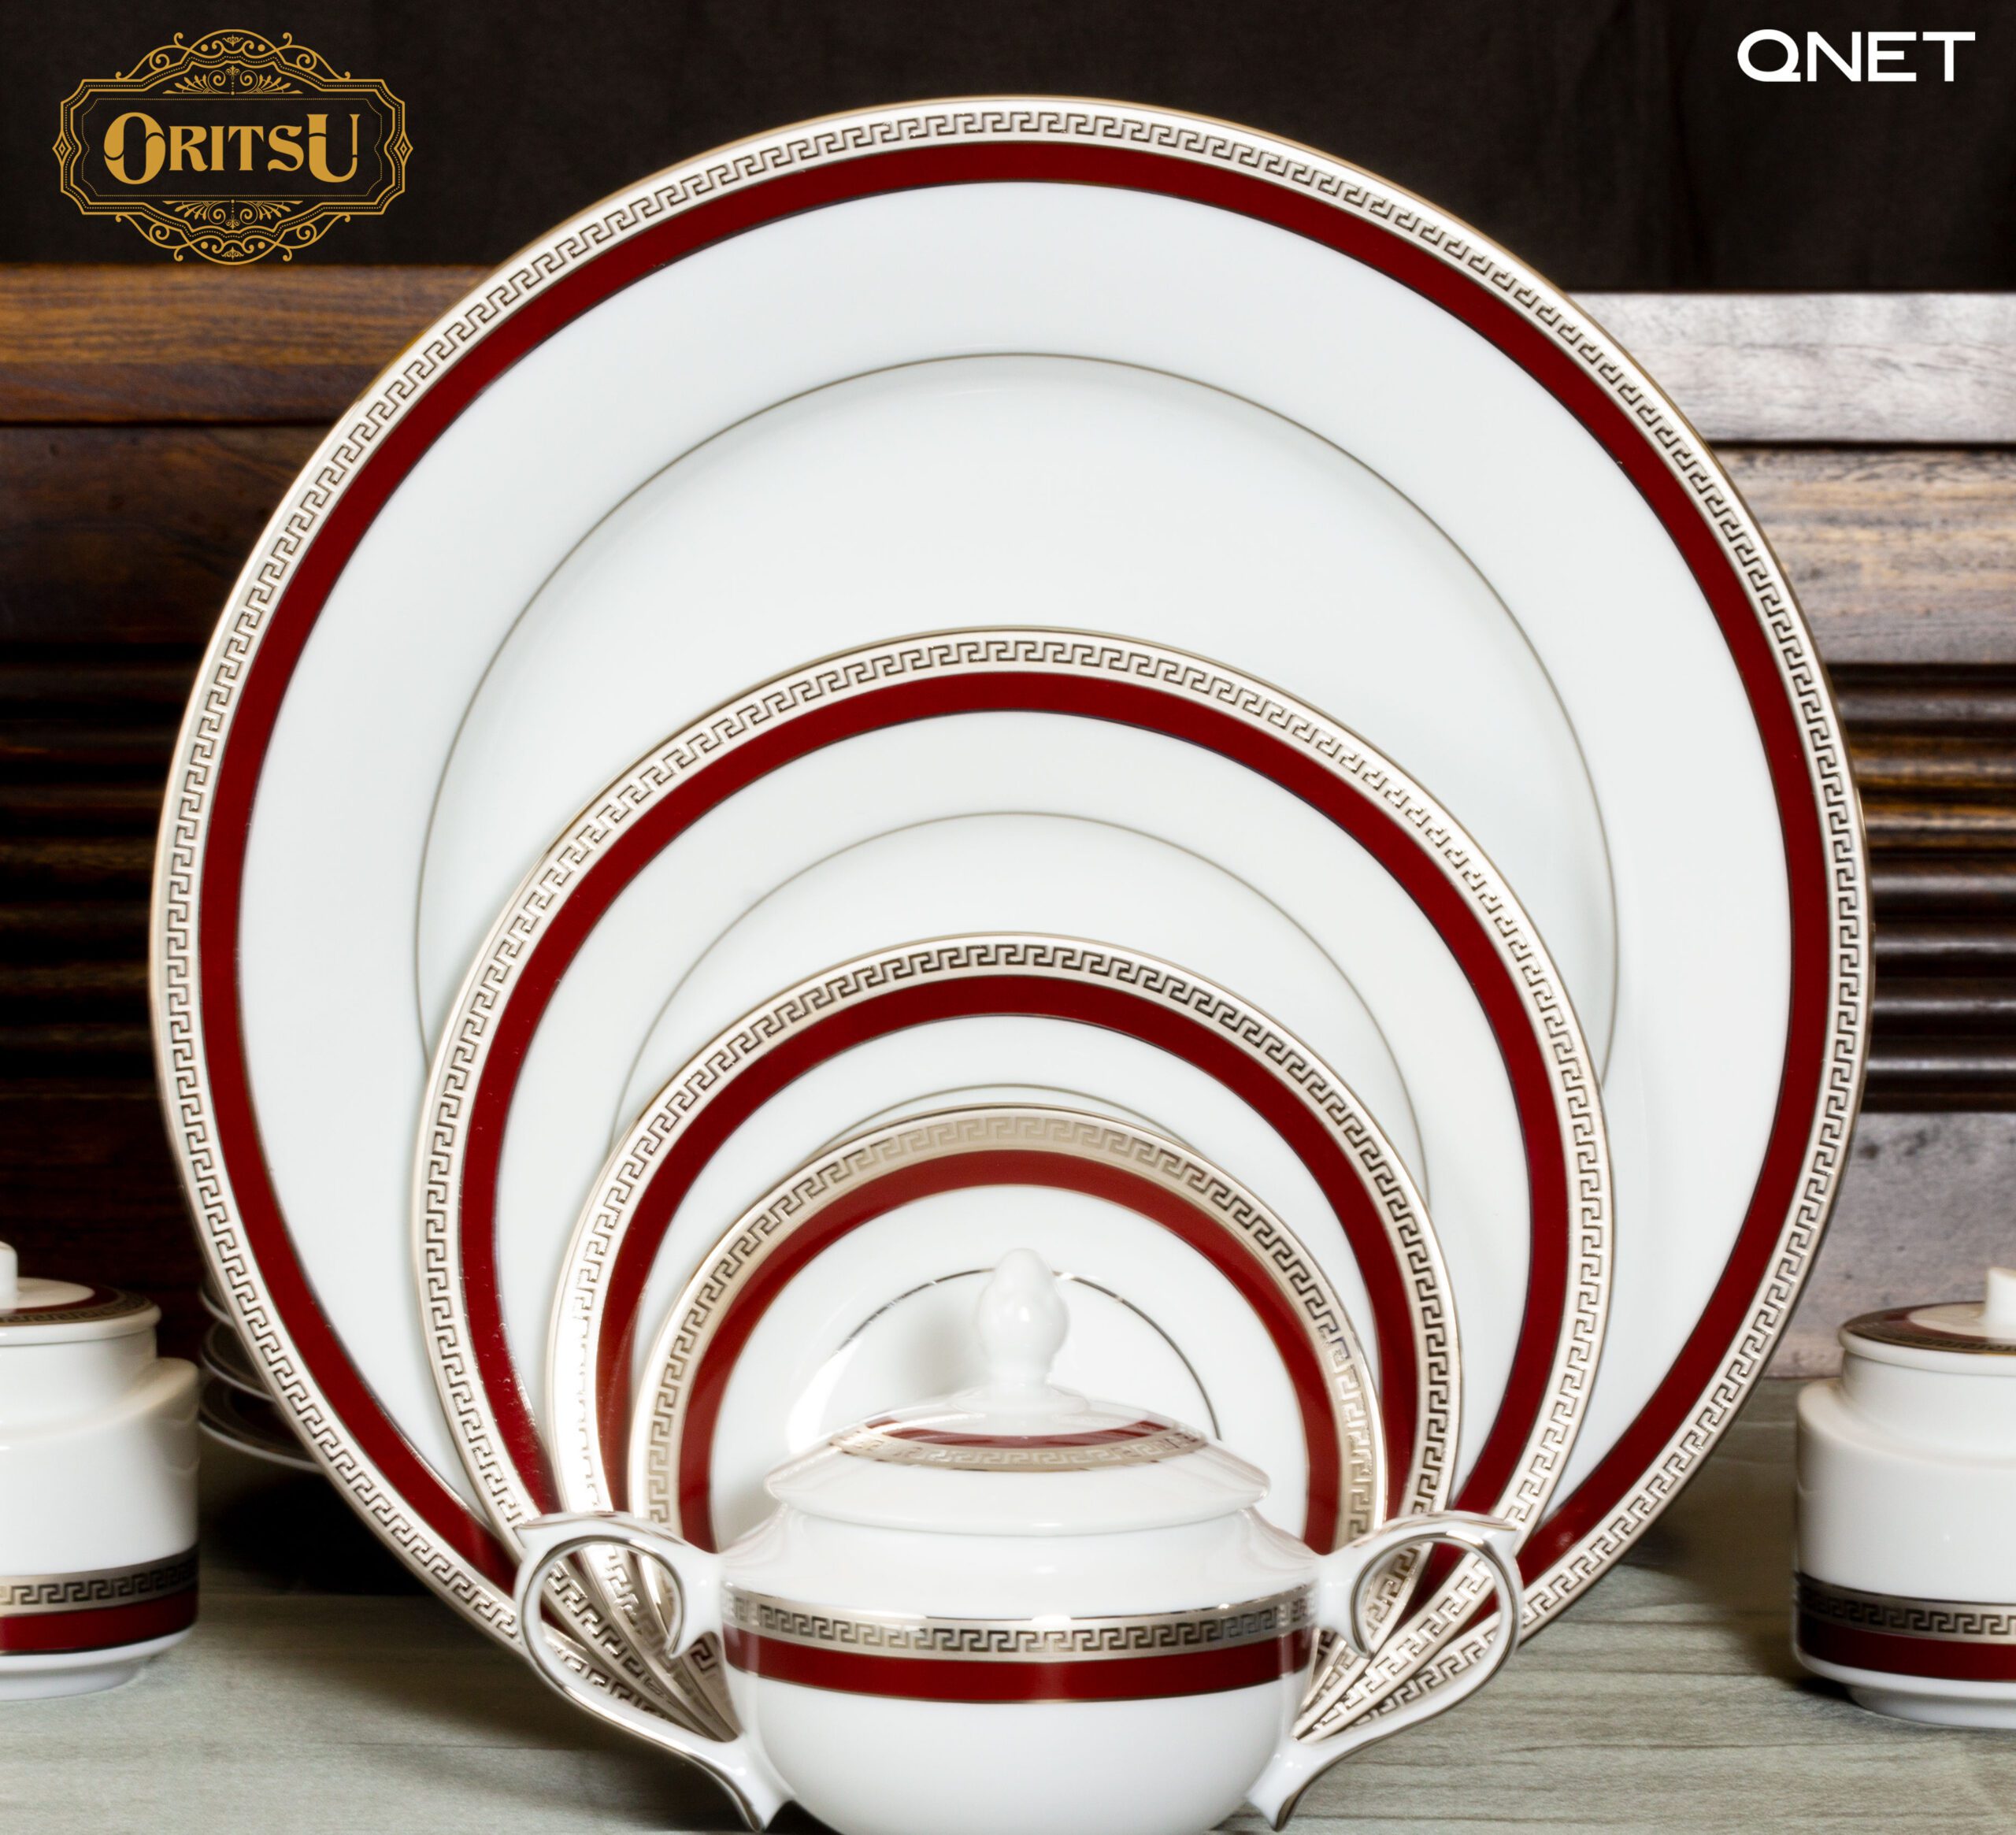 Crockery Sets from QNET